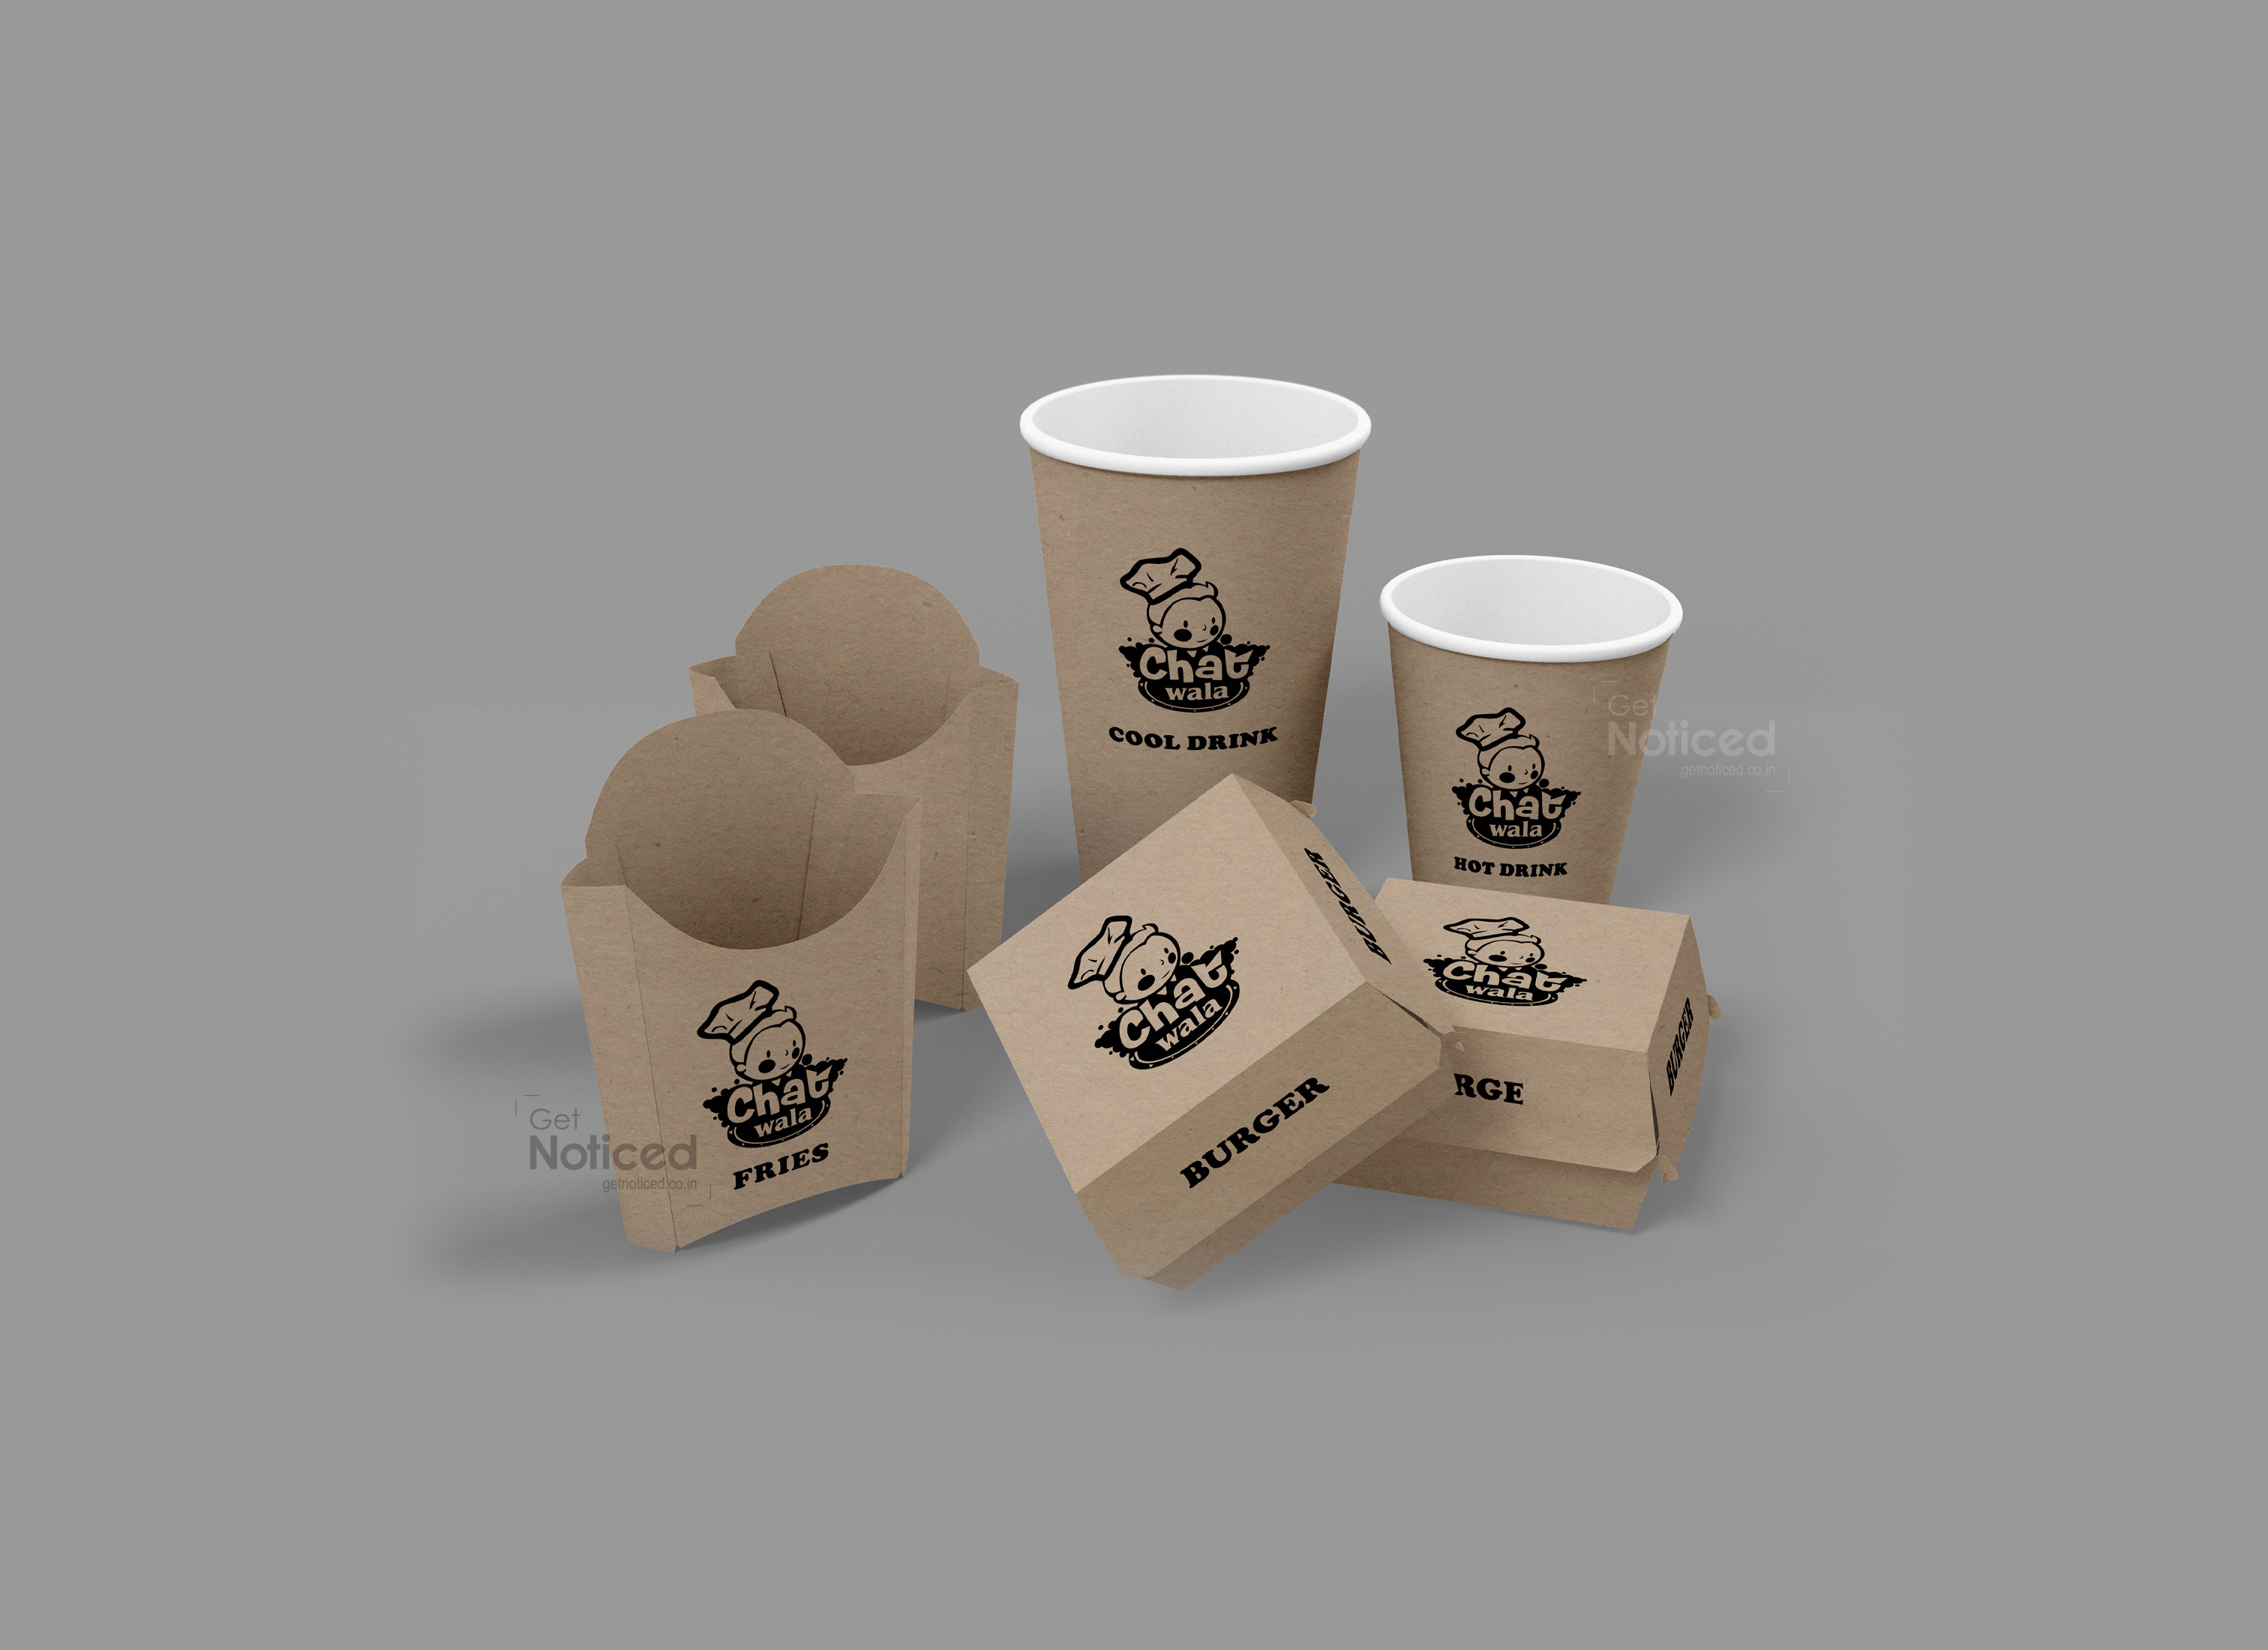 Chat Wala Packaging Design